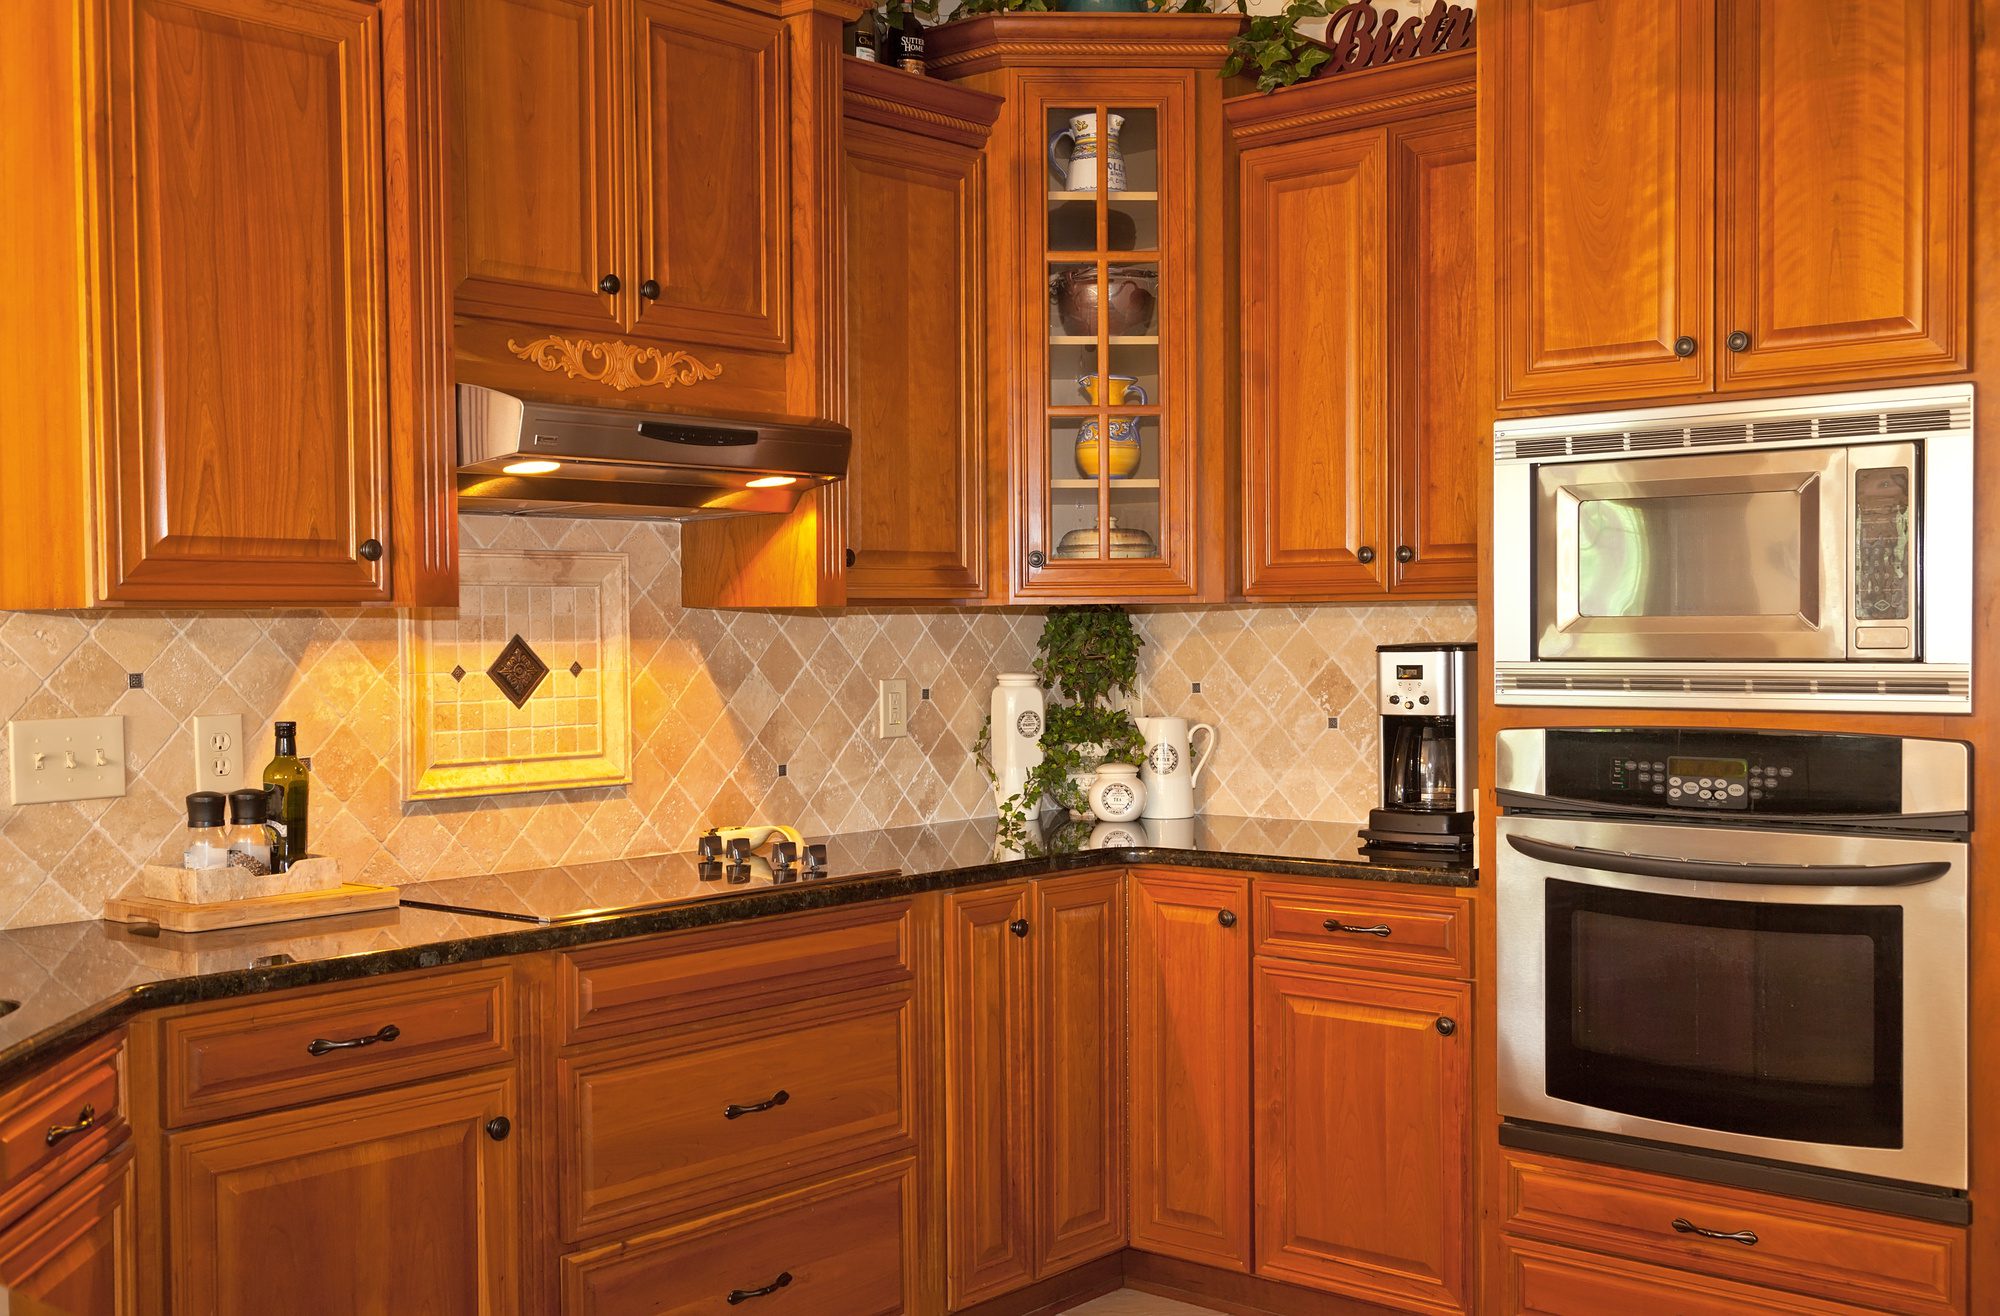 Kitchen Cabinet Dimensions Your Guide, What Is The Standard Size For Lower Kitchen Cabinets